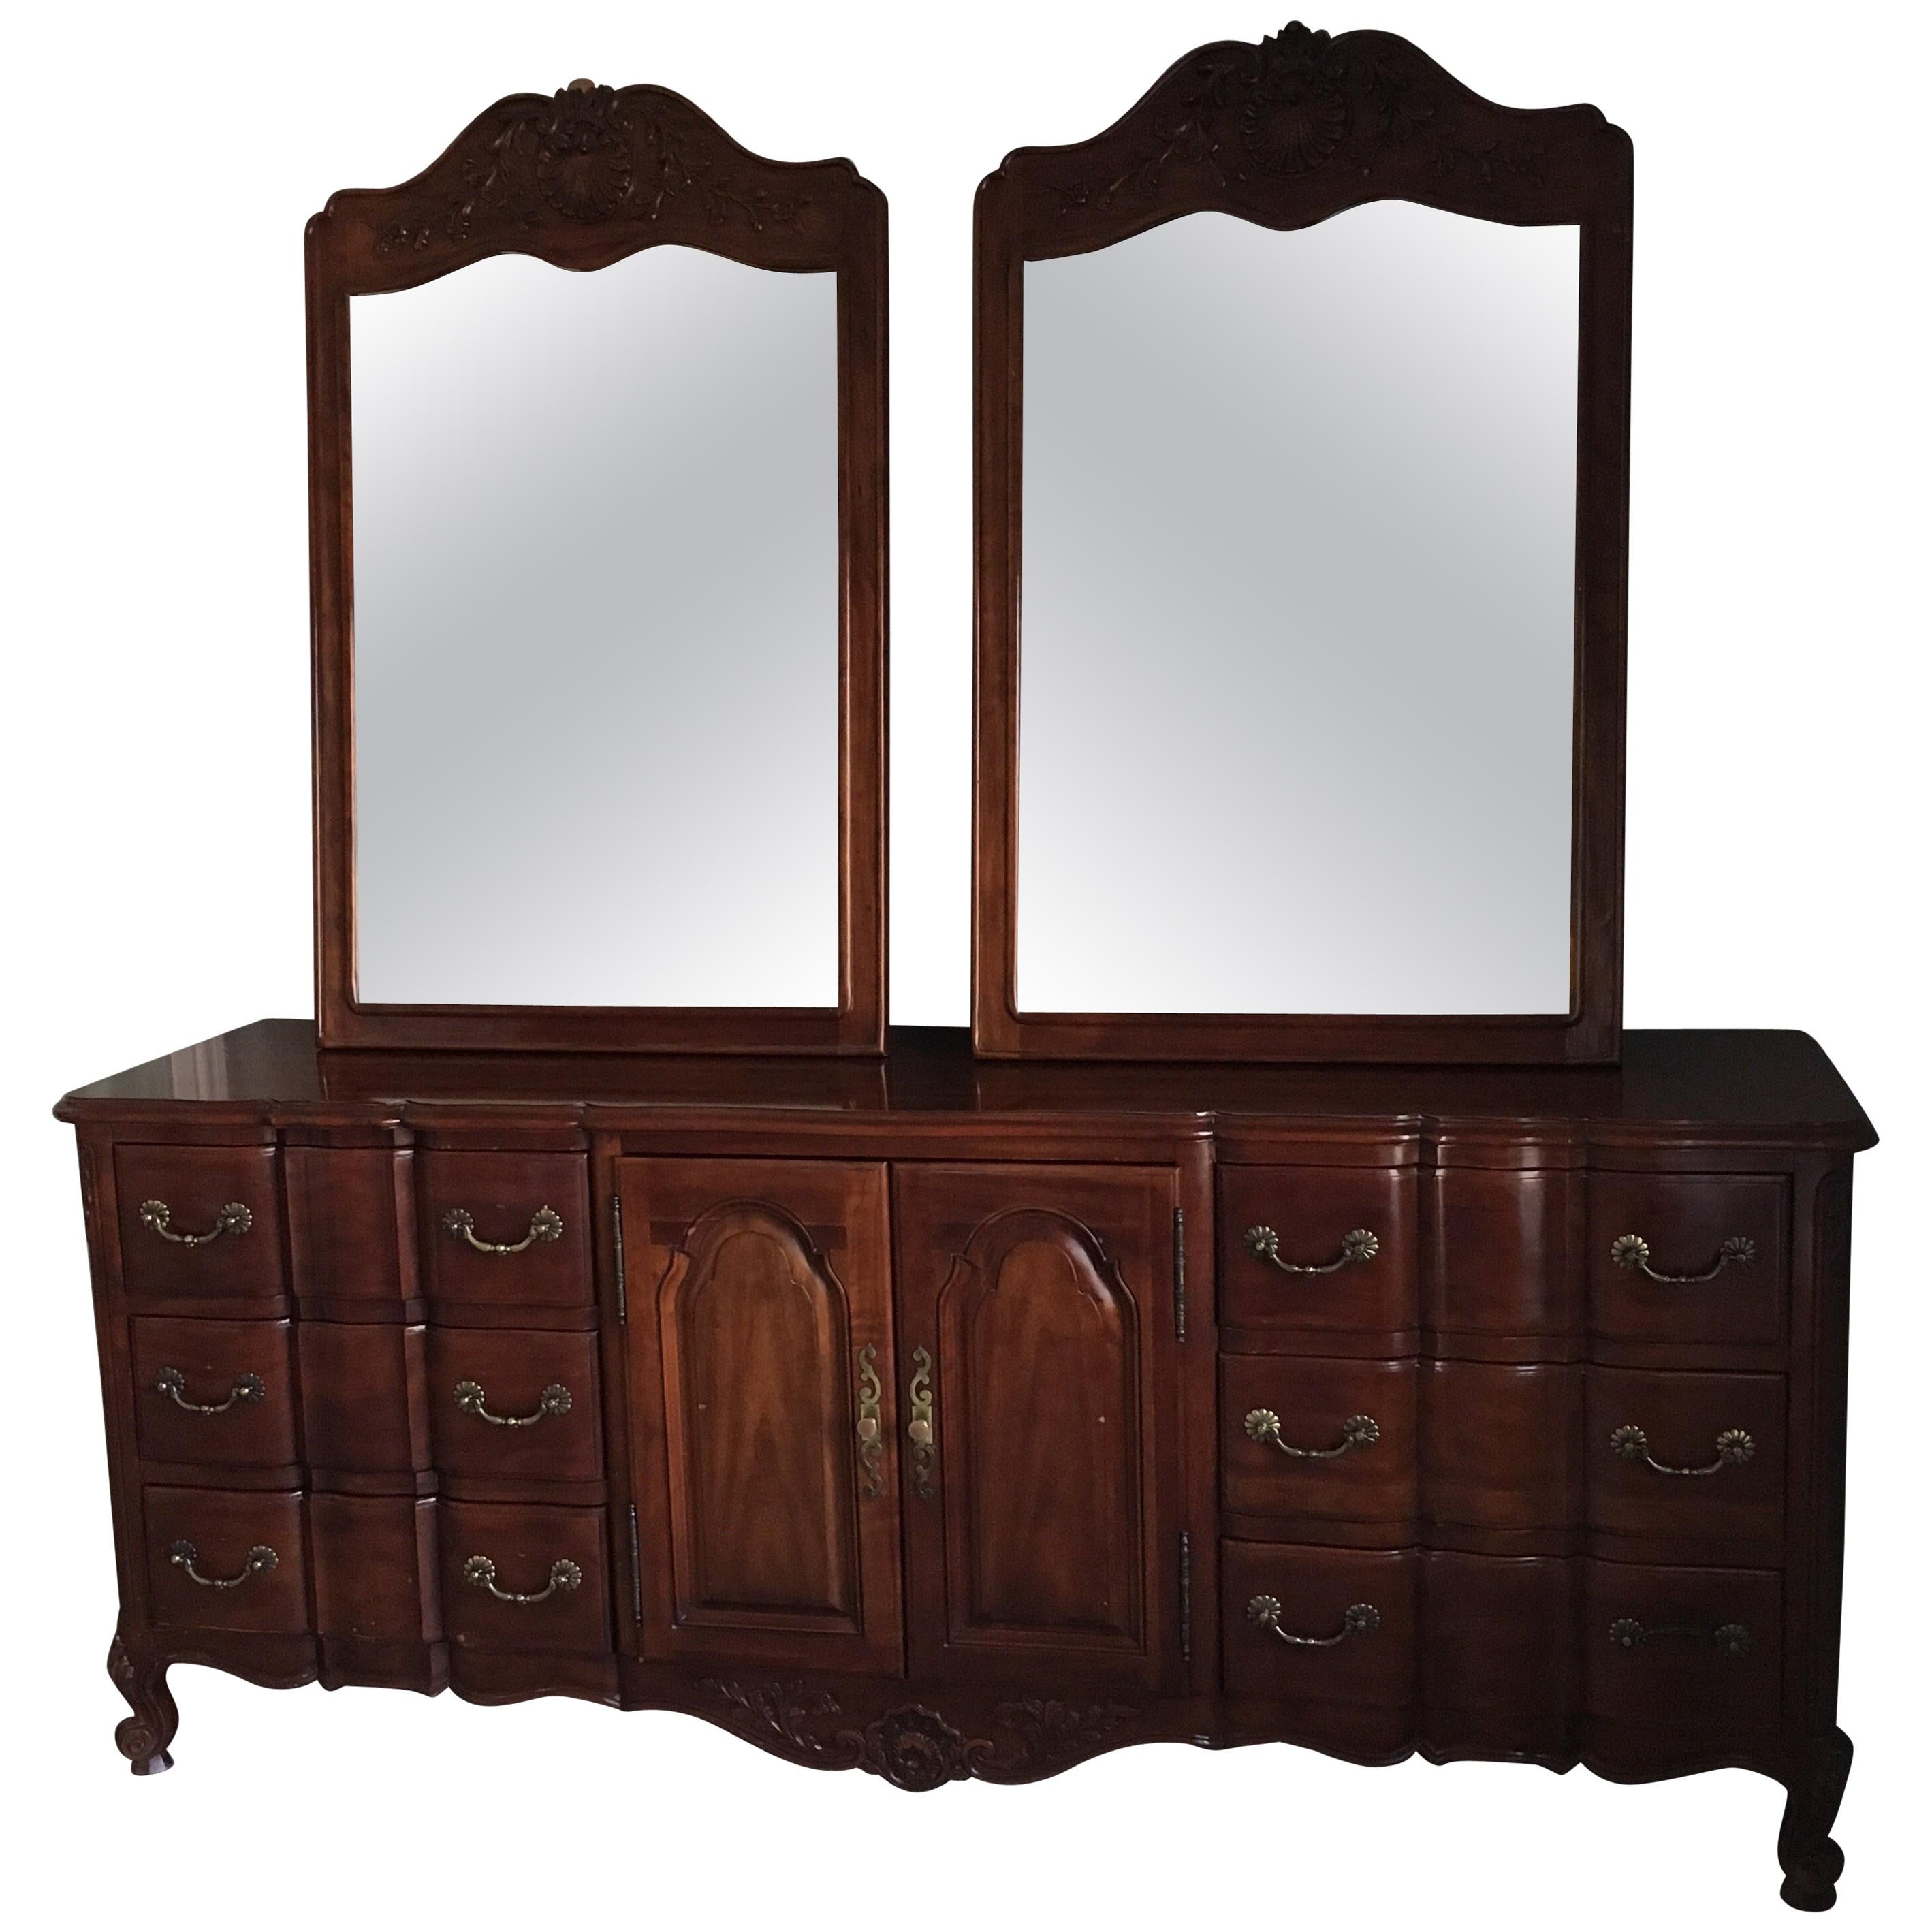 20th Century Provincial Style Double Dresser and Pair of Mirrors by Widdicomb